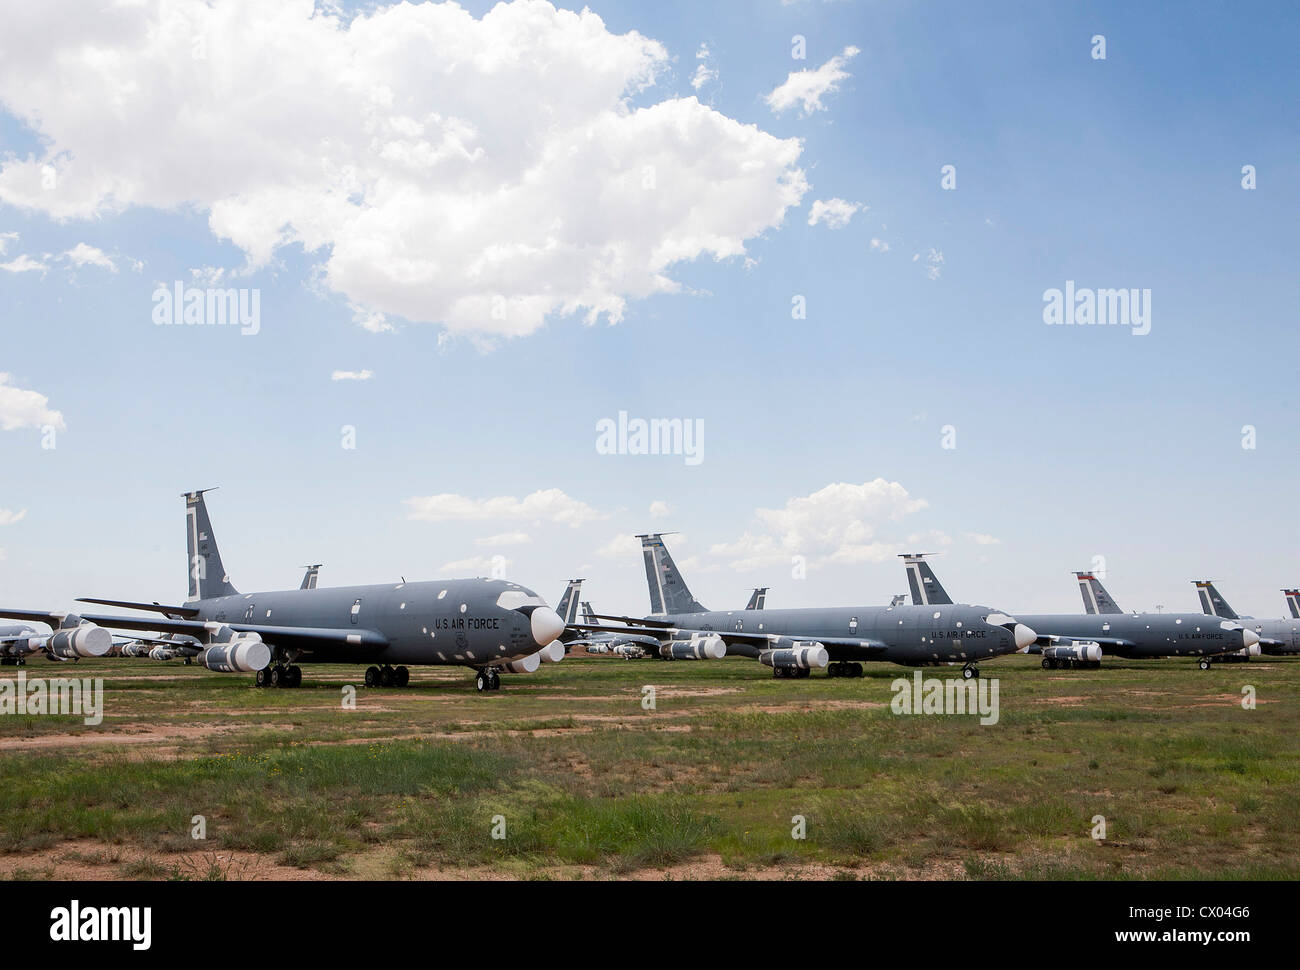 KC-135 aircraft in storage at the 309th Aerospace Maintenance and Regeneration Group at Davis-Monthan Air Force Base. Stock Photo